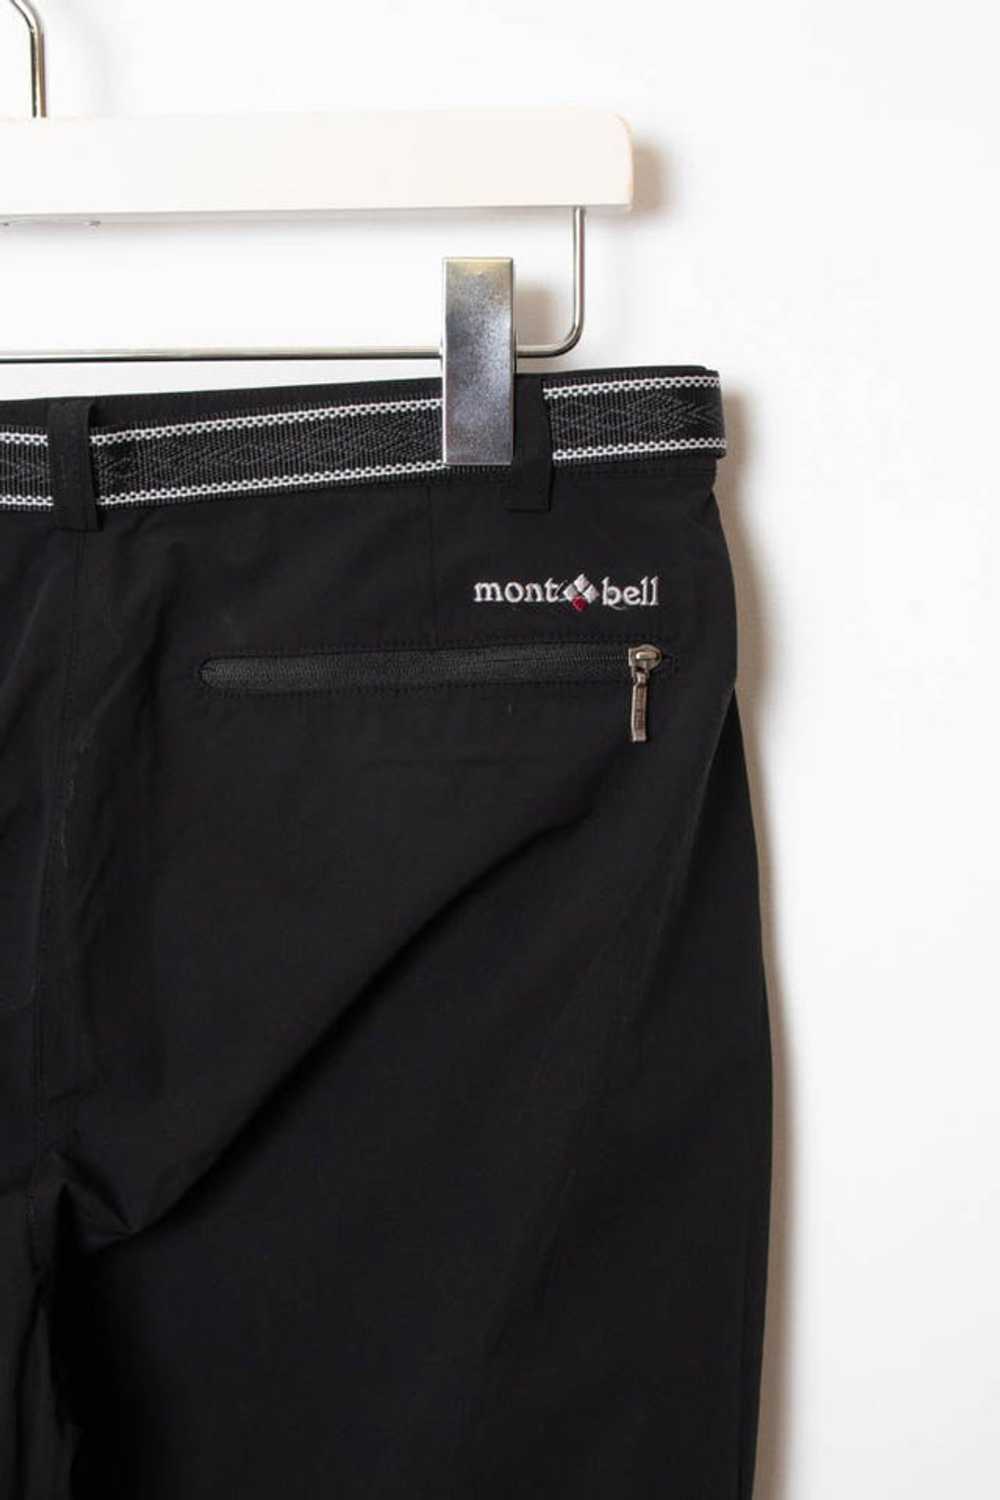 Women's Montbell Pants (M) - image 4